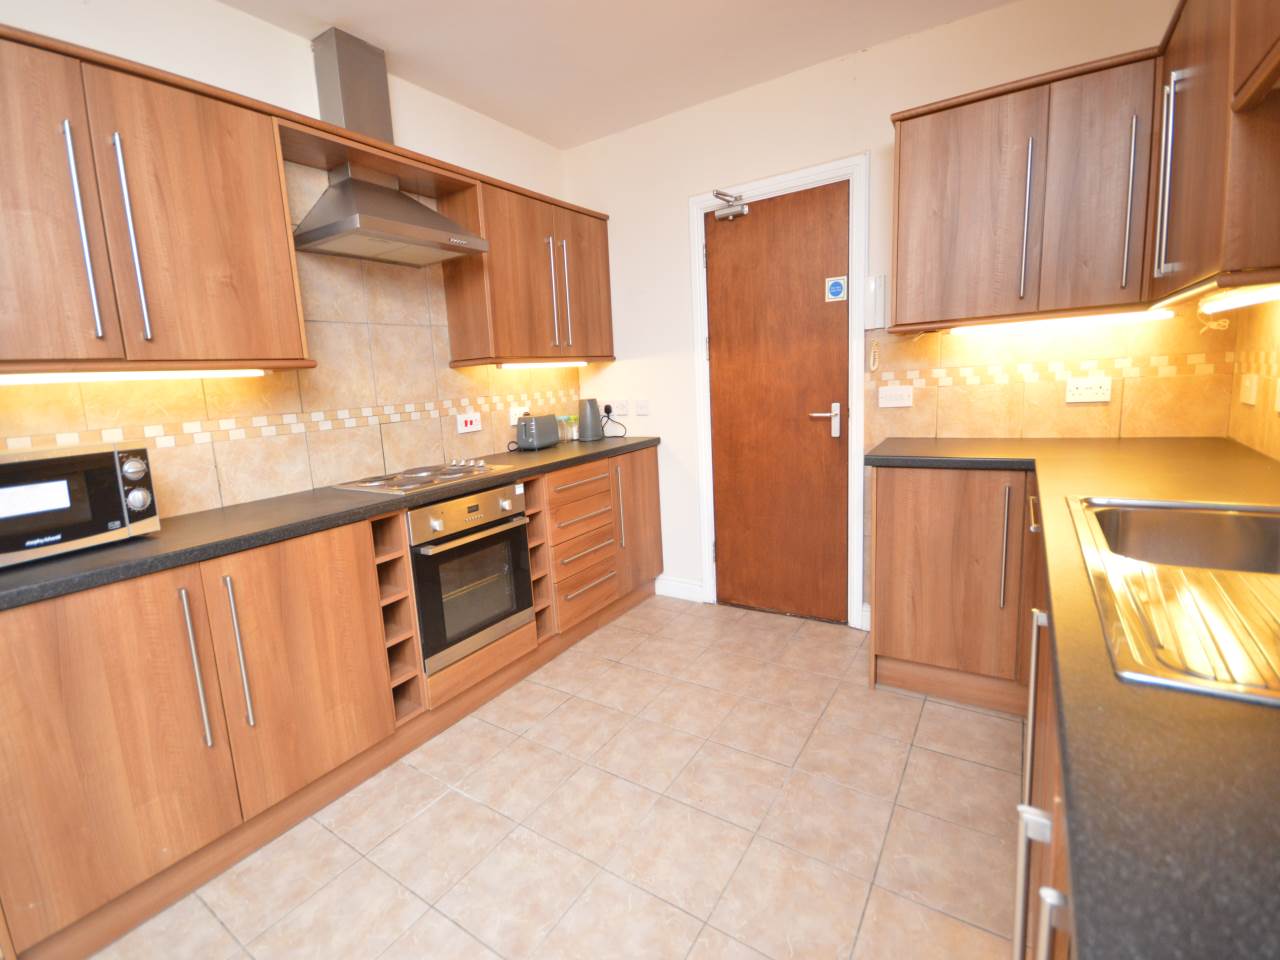 2 bed flat to rent in Brynymor Crescent, Uplands - Property Image 1